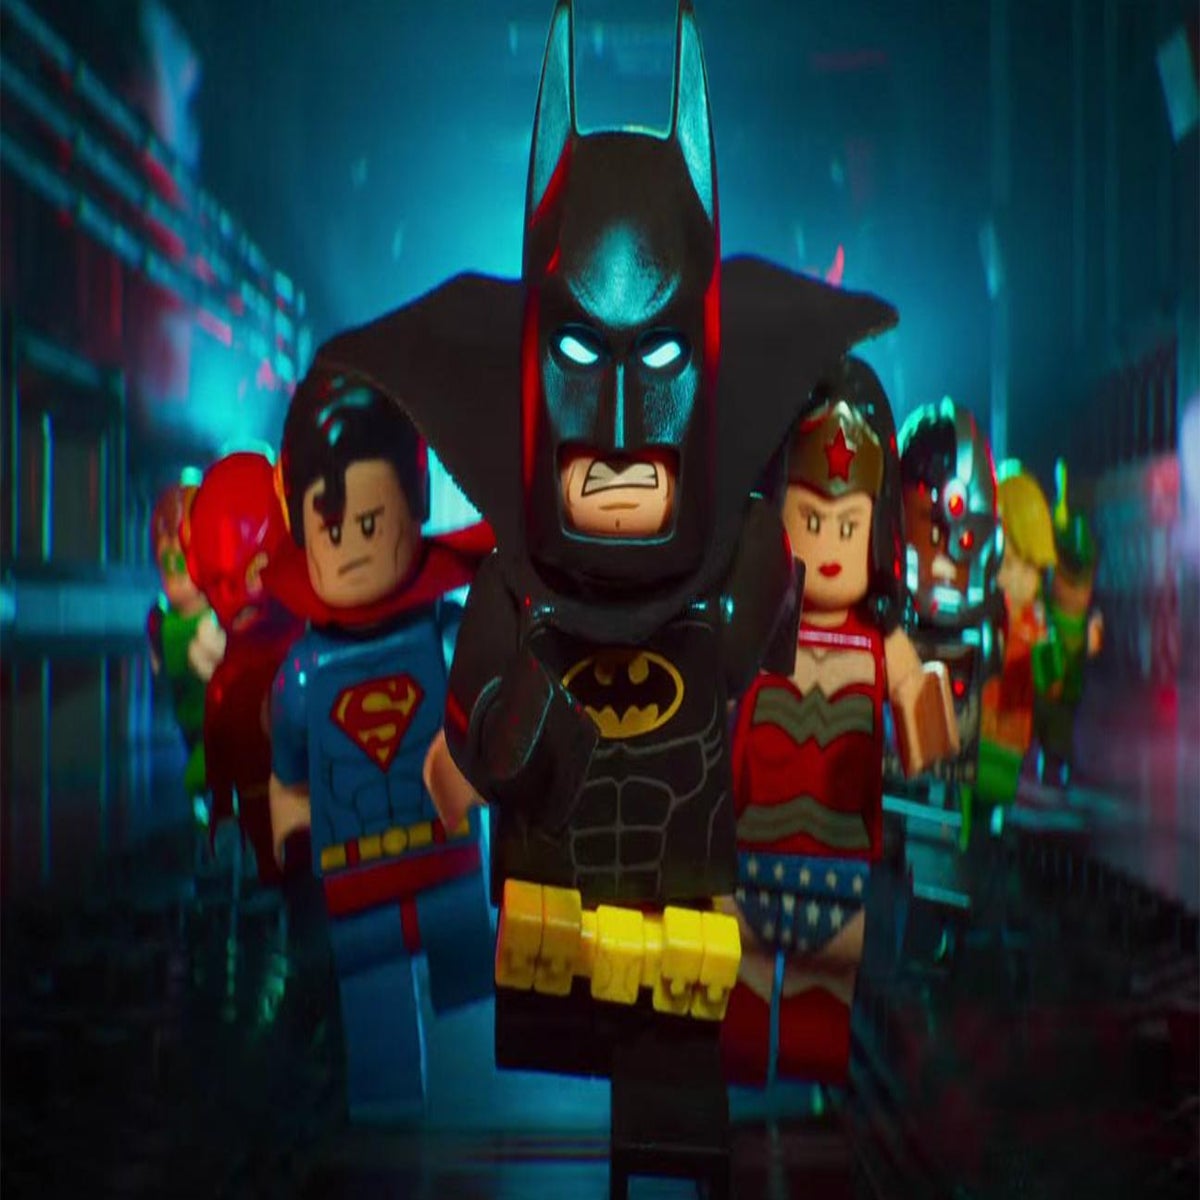 Your guide to the incredible A-list voice cast of the LEGO Batman movie